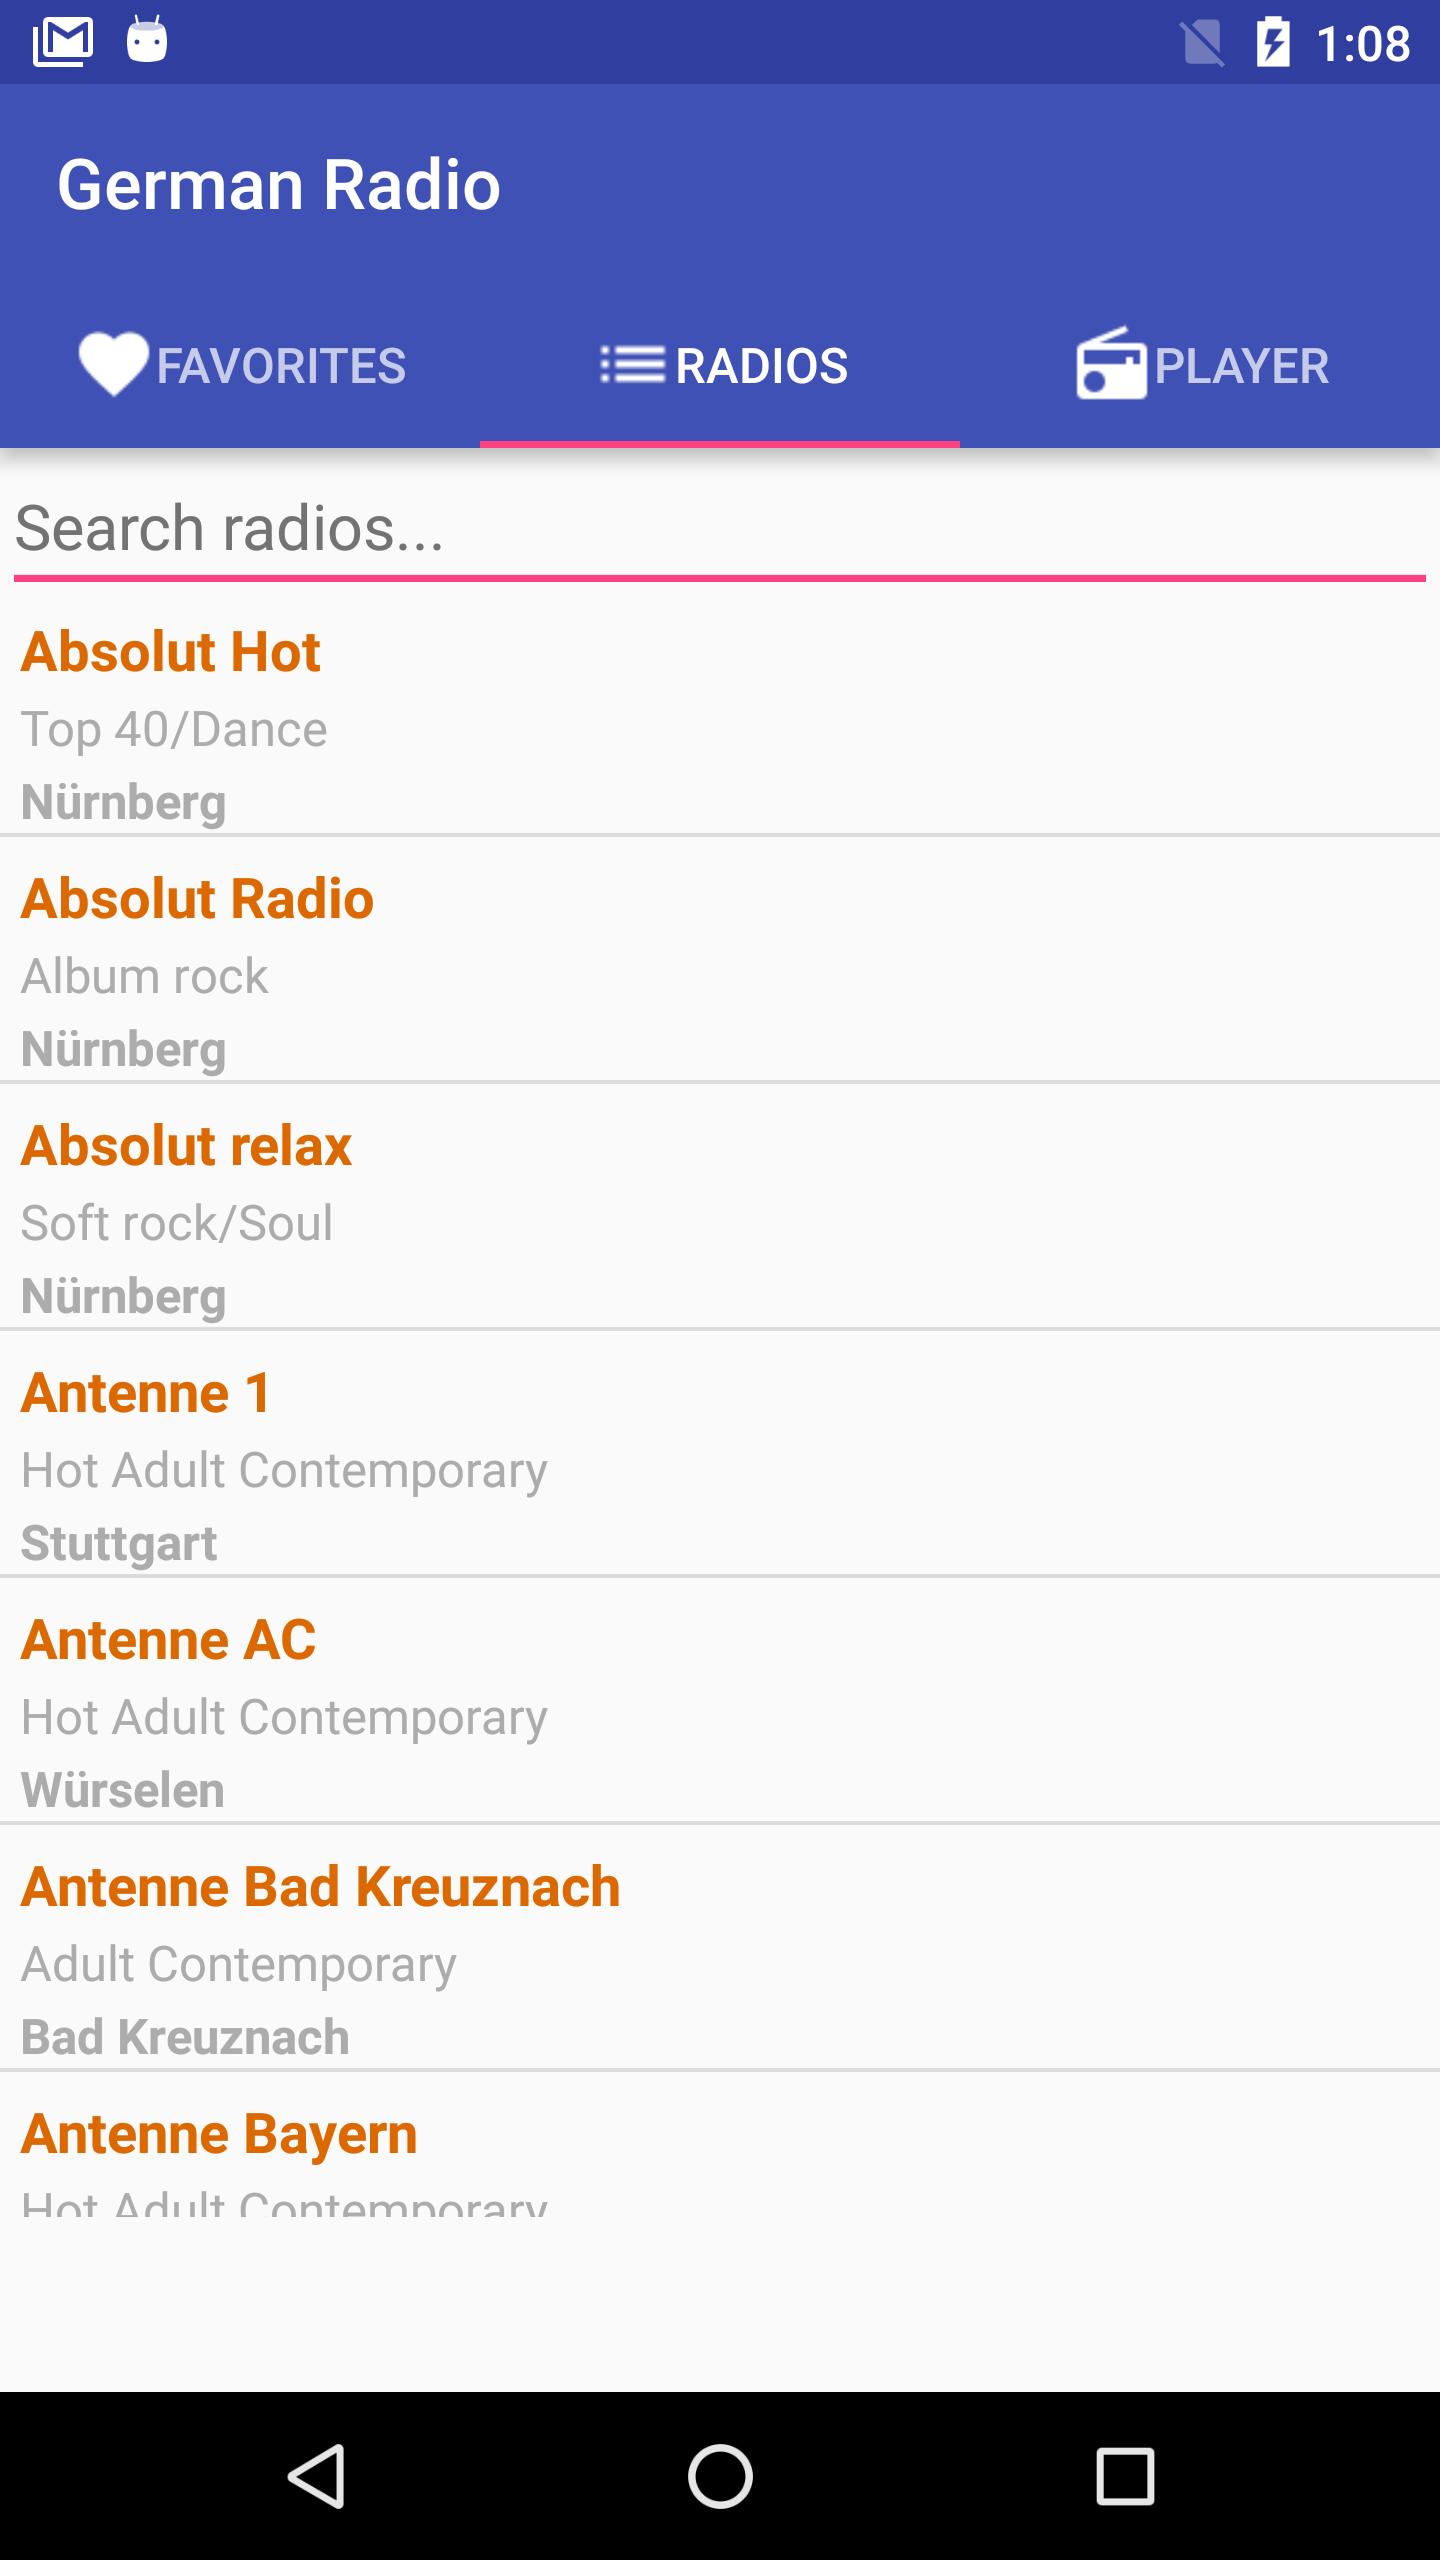 German Radio for Android - APK Download